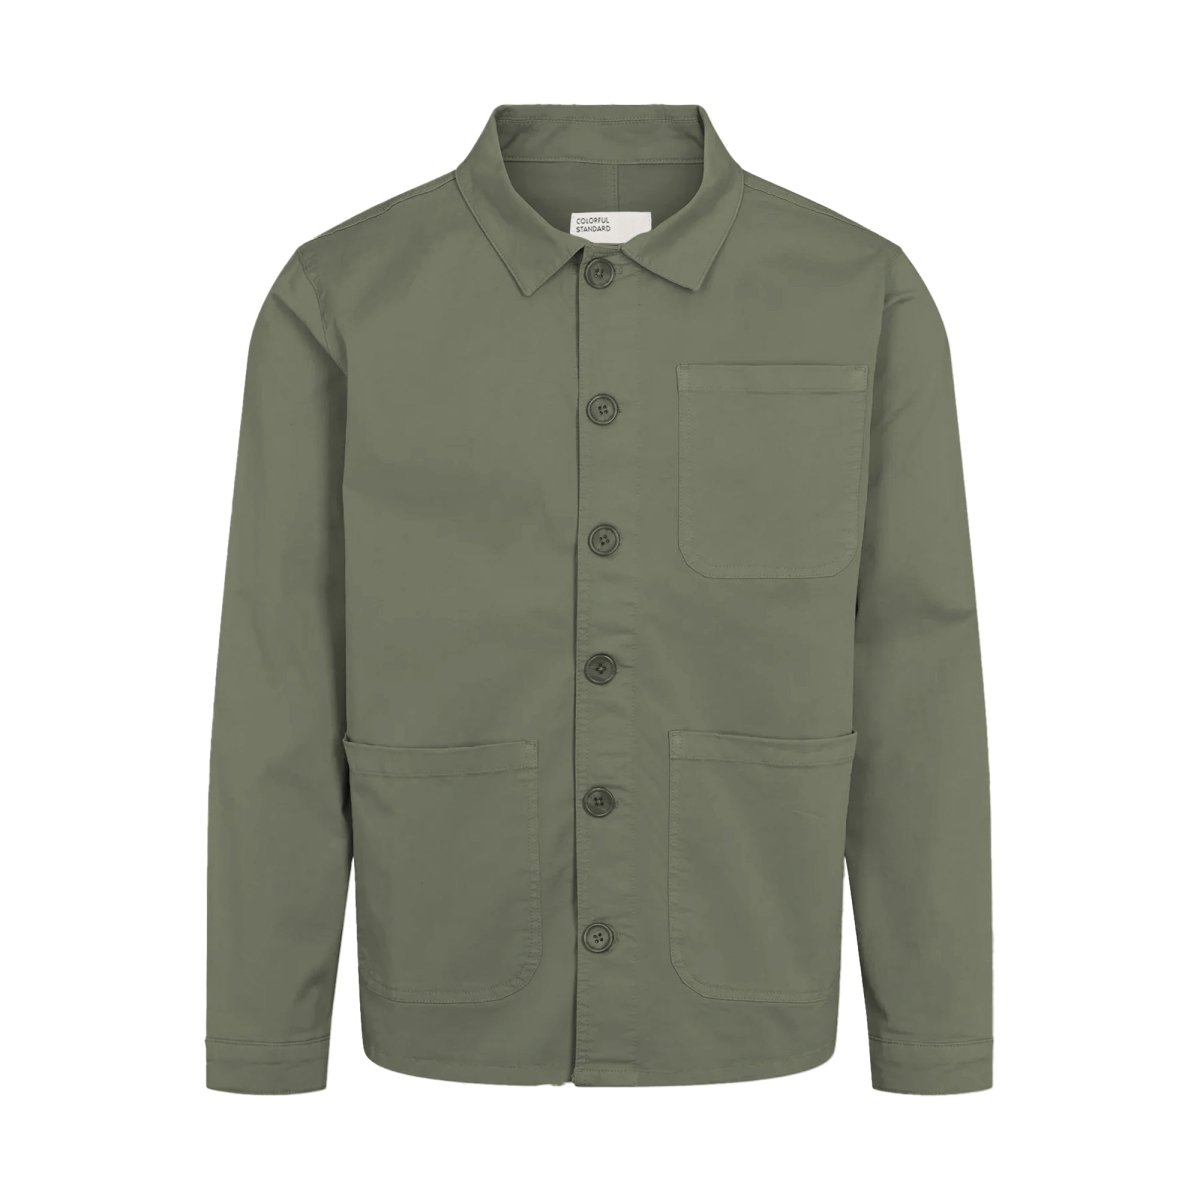 Colorful Workwear Jacket Dusty Olive - KYOTO - Colorful Standard